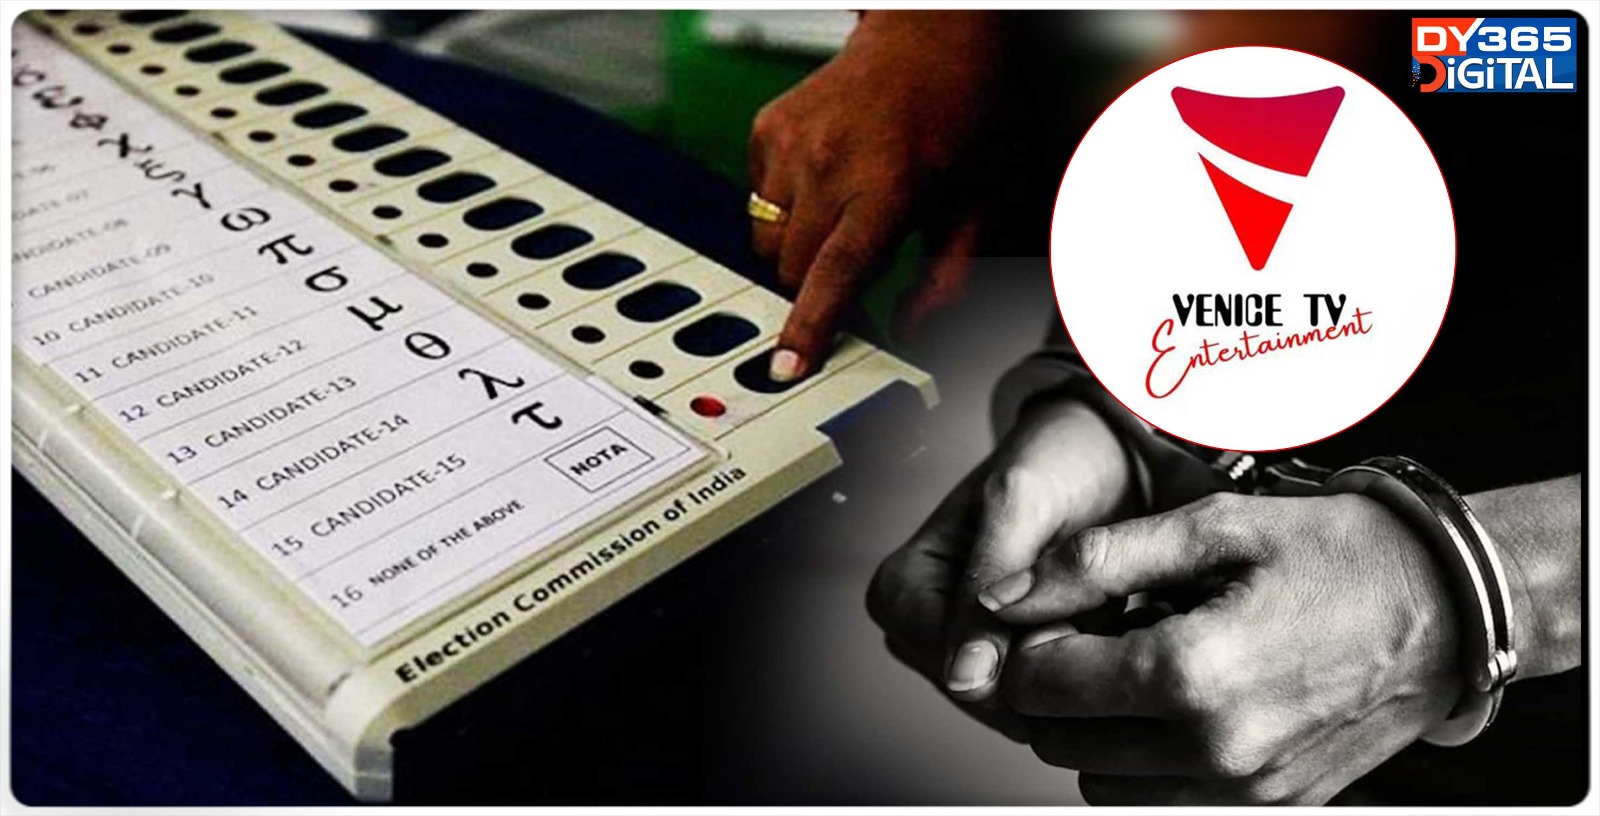 kerala-youtuber-arrested-over-fake-news-on-voting-machines